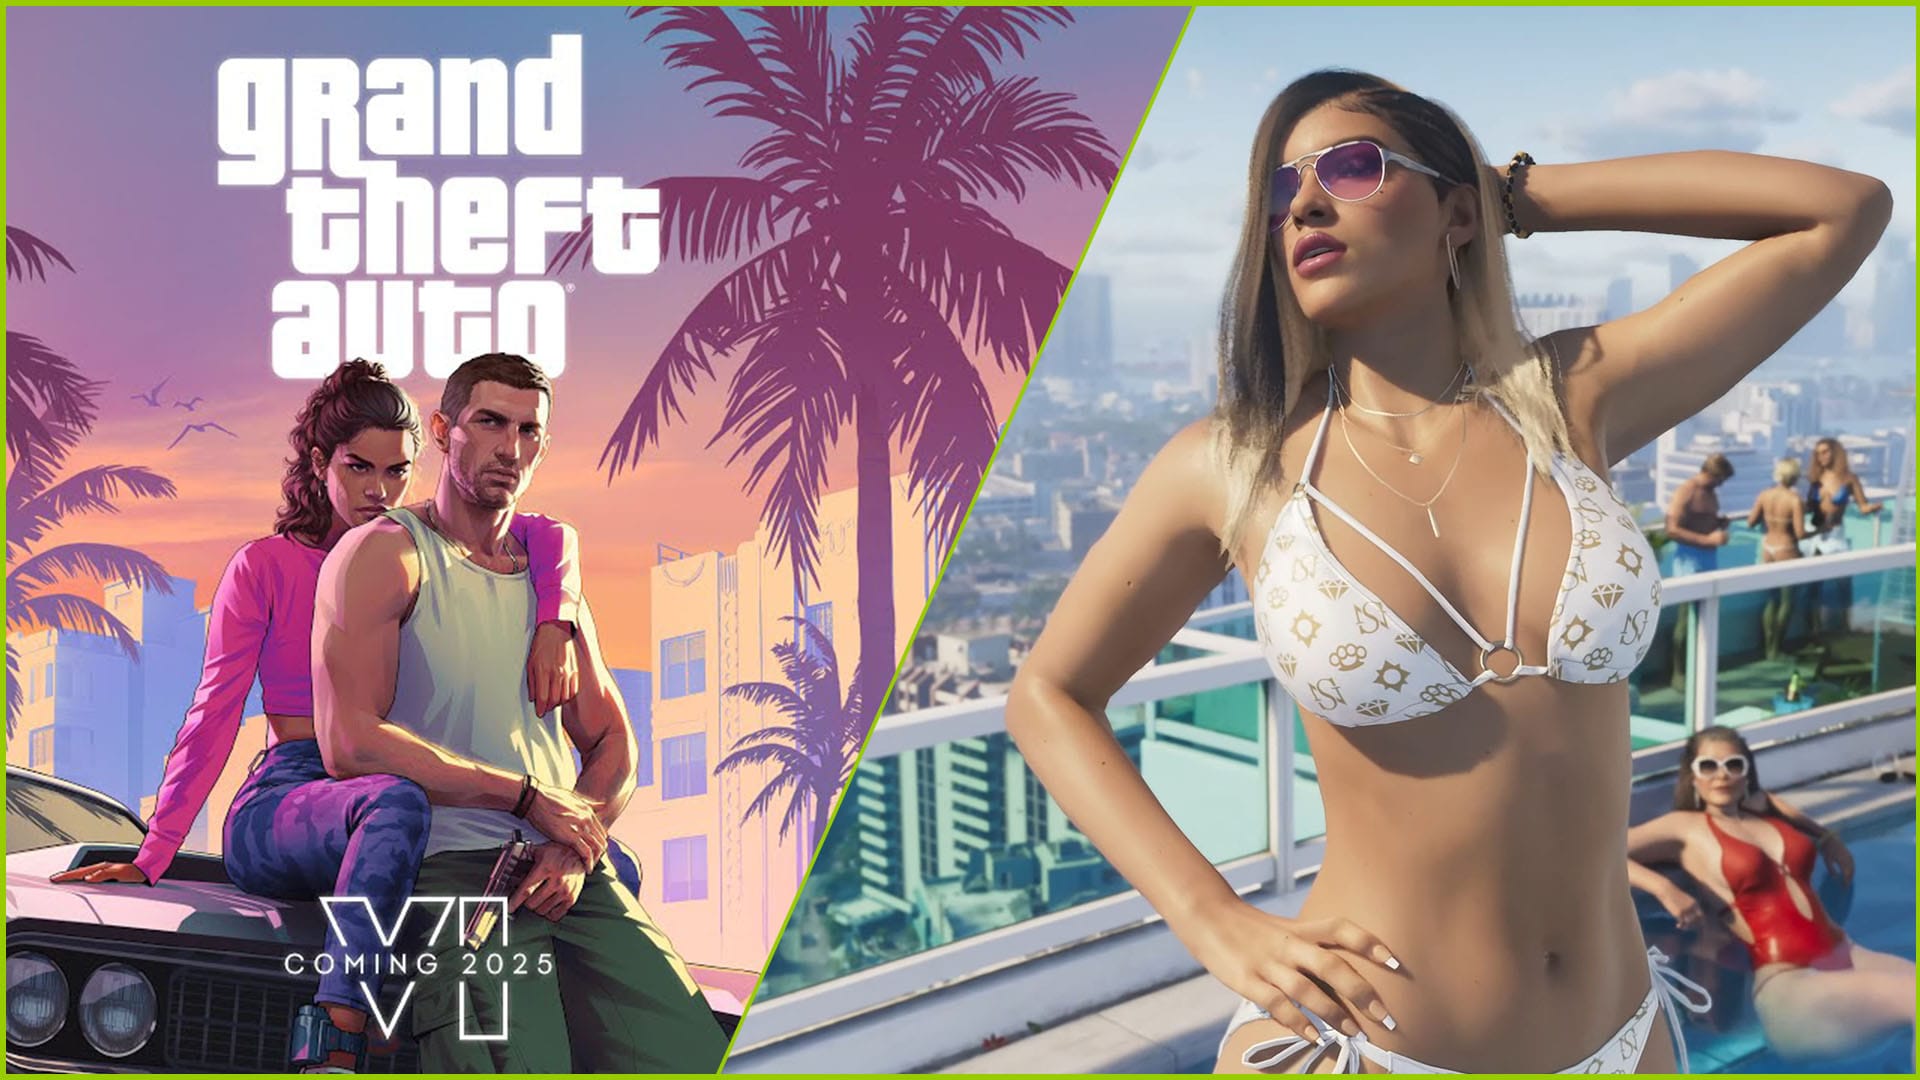 The Grand Theft Auto 6 Trailer Achieved a Crazy 90 Million Views in 24 Hours